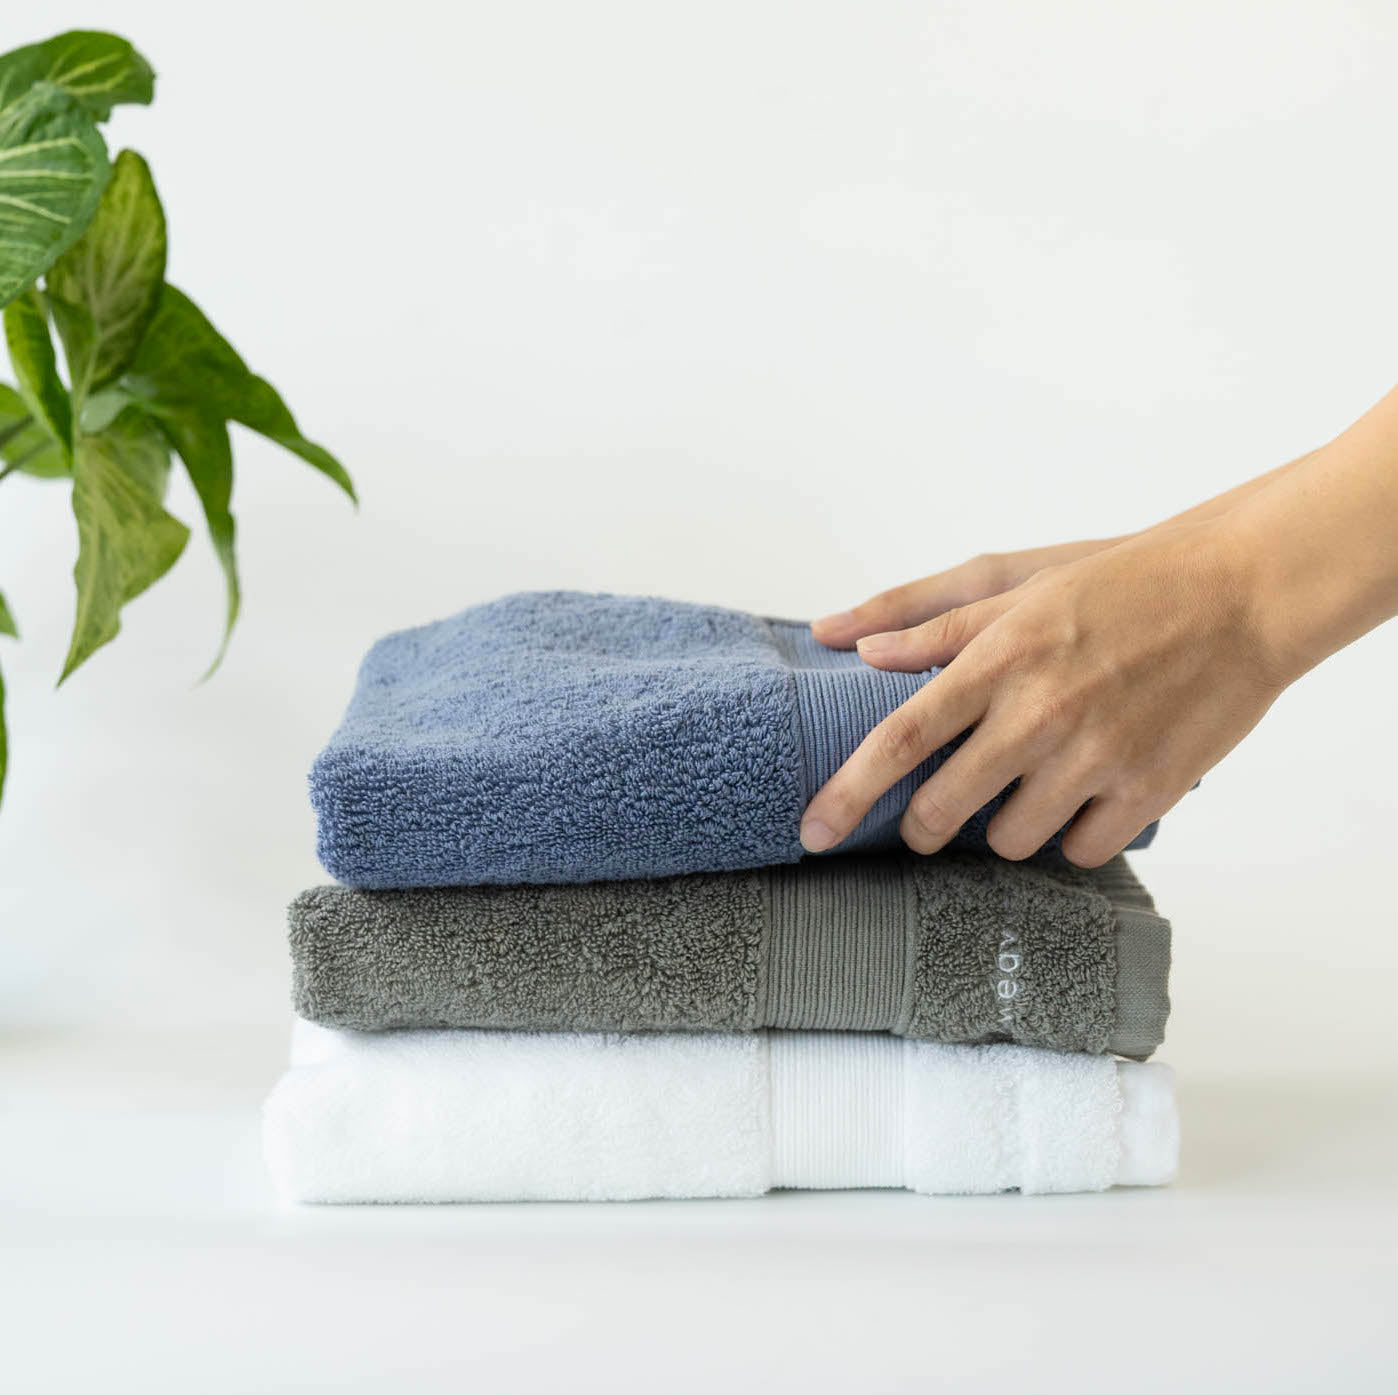 100% Combed Cotton, Lint-Free, Absorbent &amp; Quick-Drying. Ultra soft cotton hand towels in Weavve Home Singapore Bath Collection.